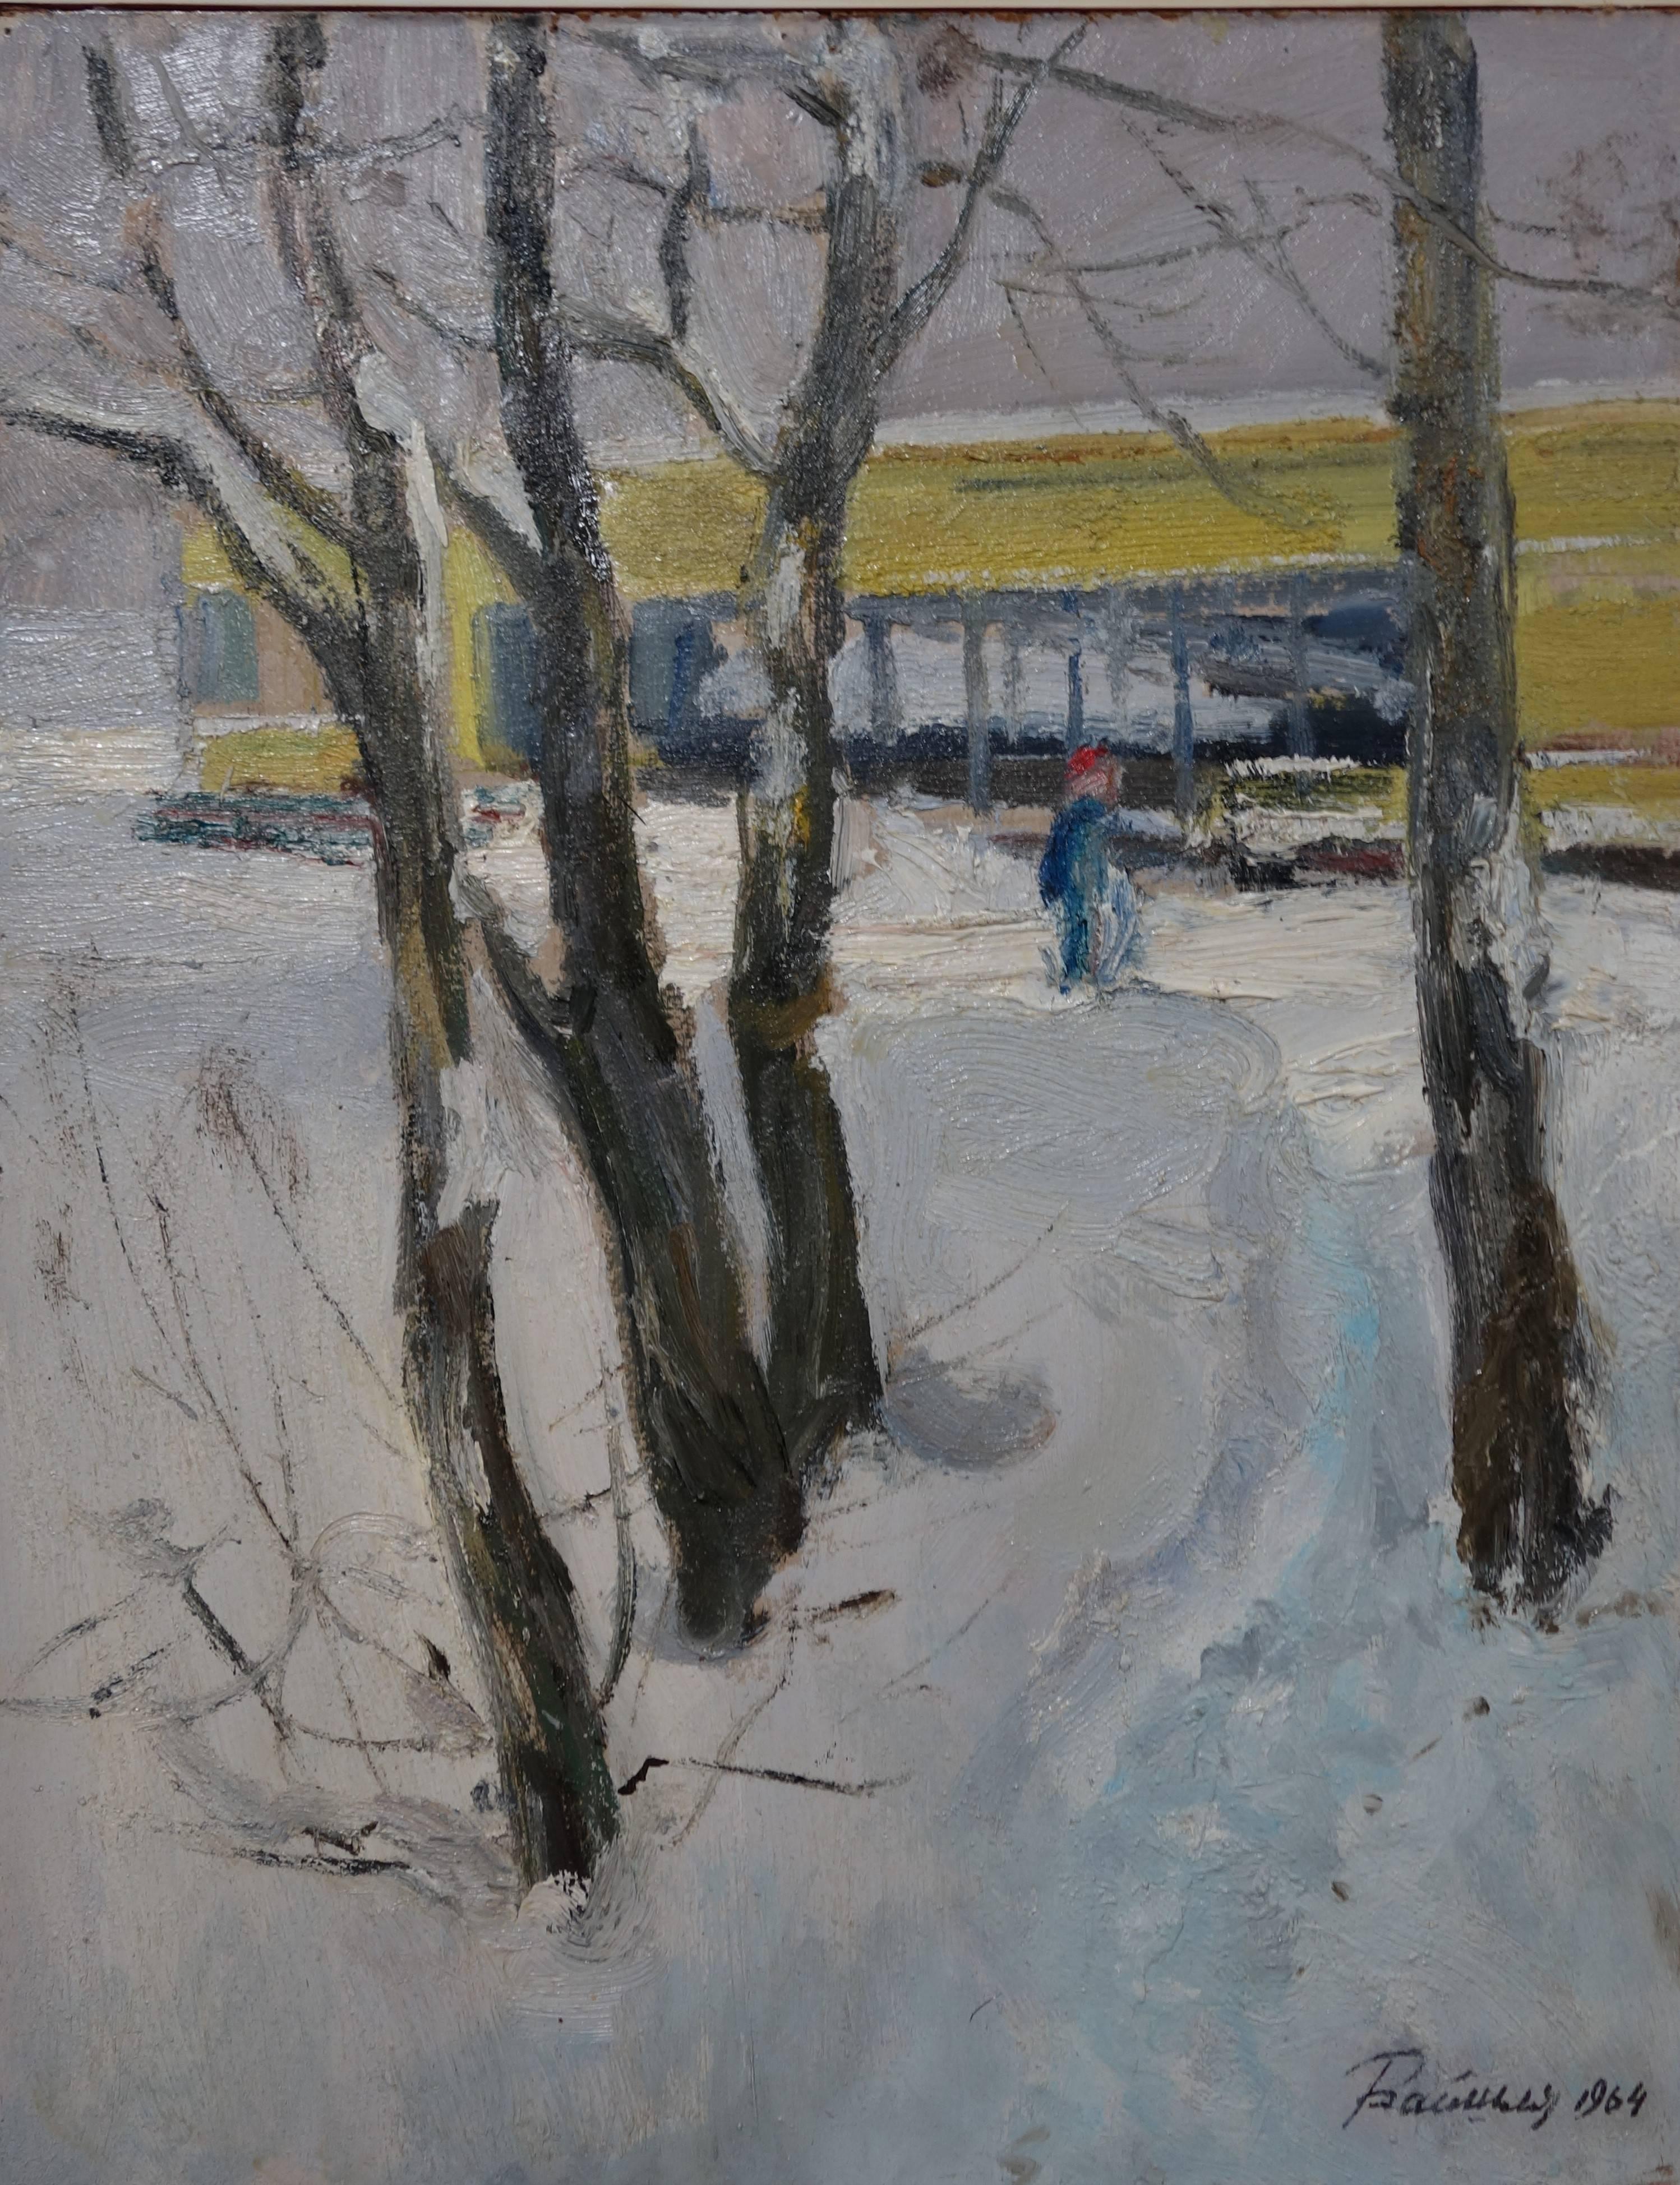 Leonid VAICHILIA Figurative Painting - "Yellow house in the snow" Snow, Forest, Winter, White Oil cm. 39 x 50 1964